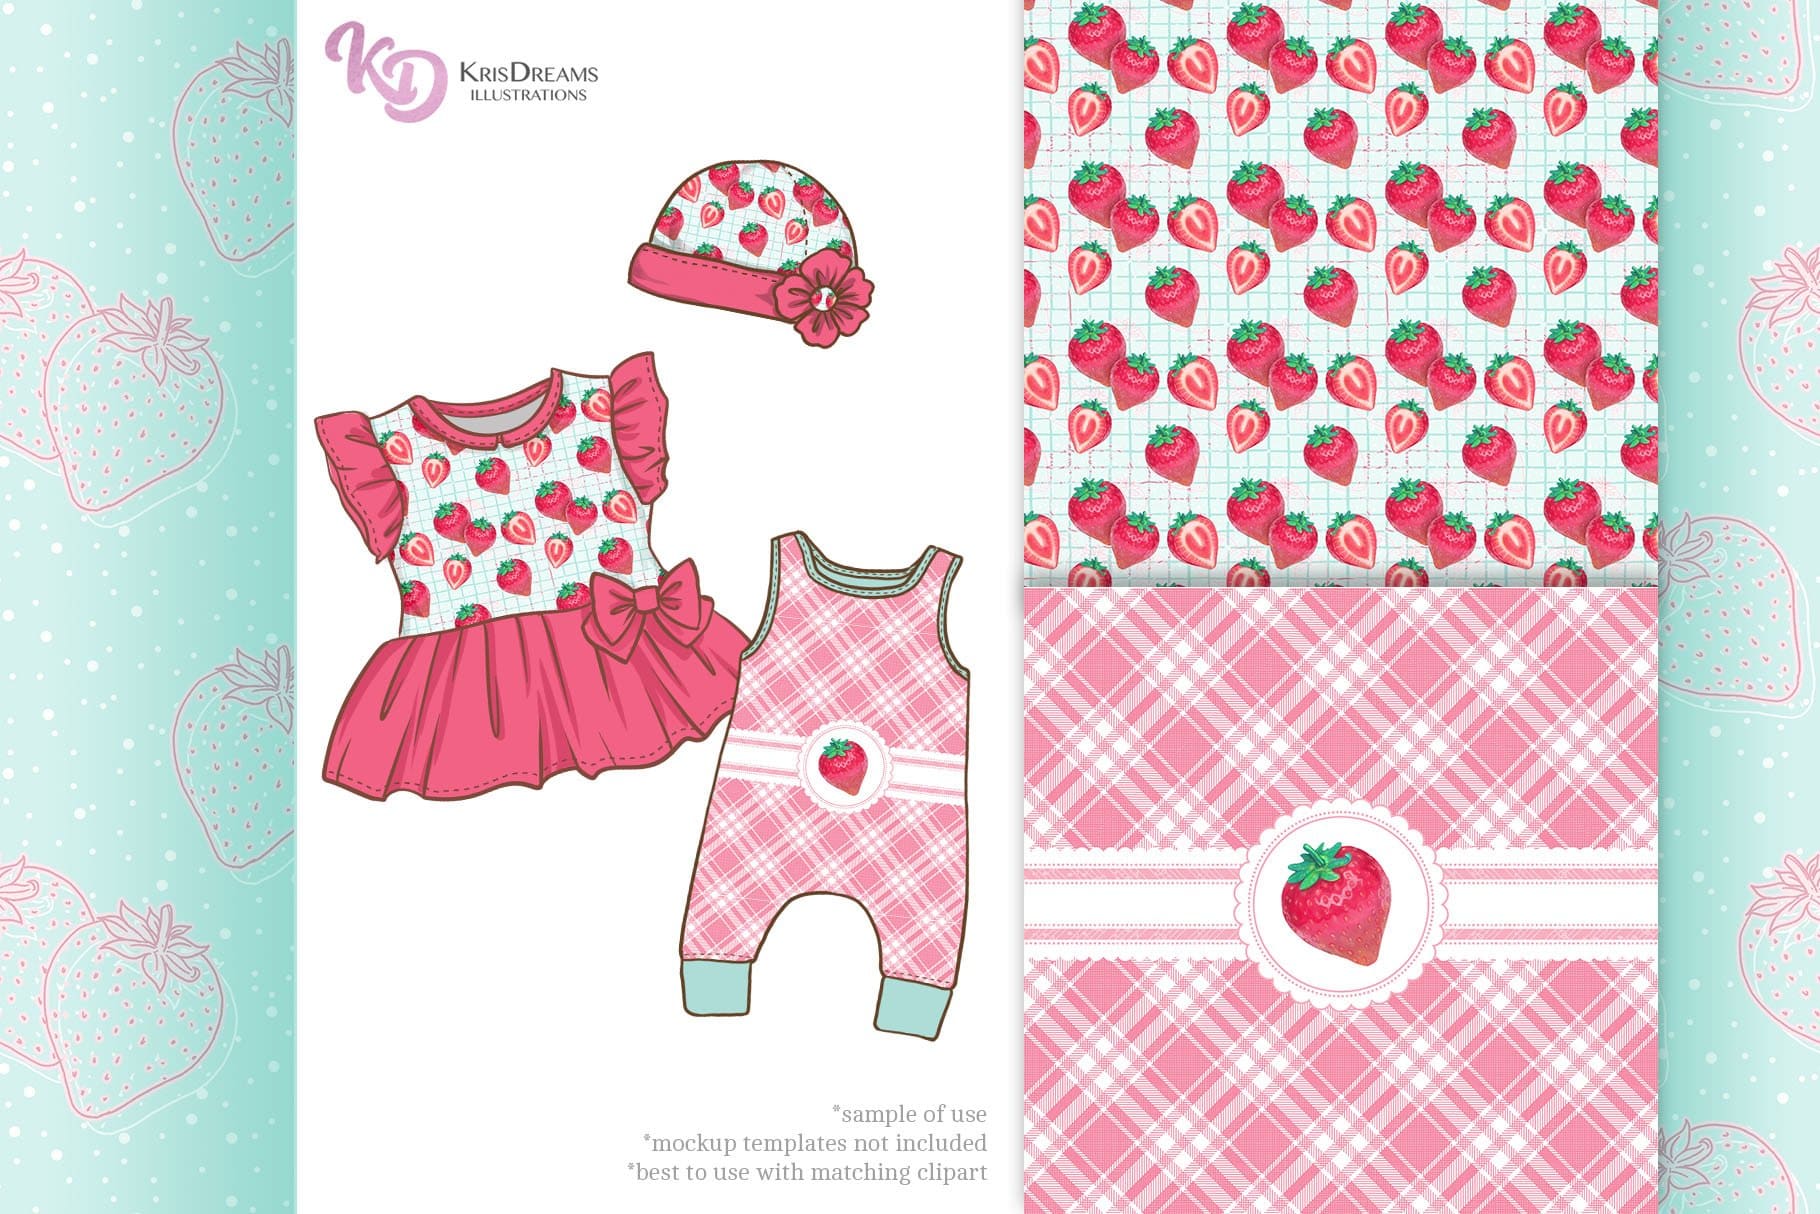 Children's dresses and hats with a strawberry print.